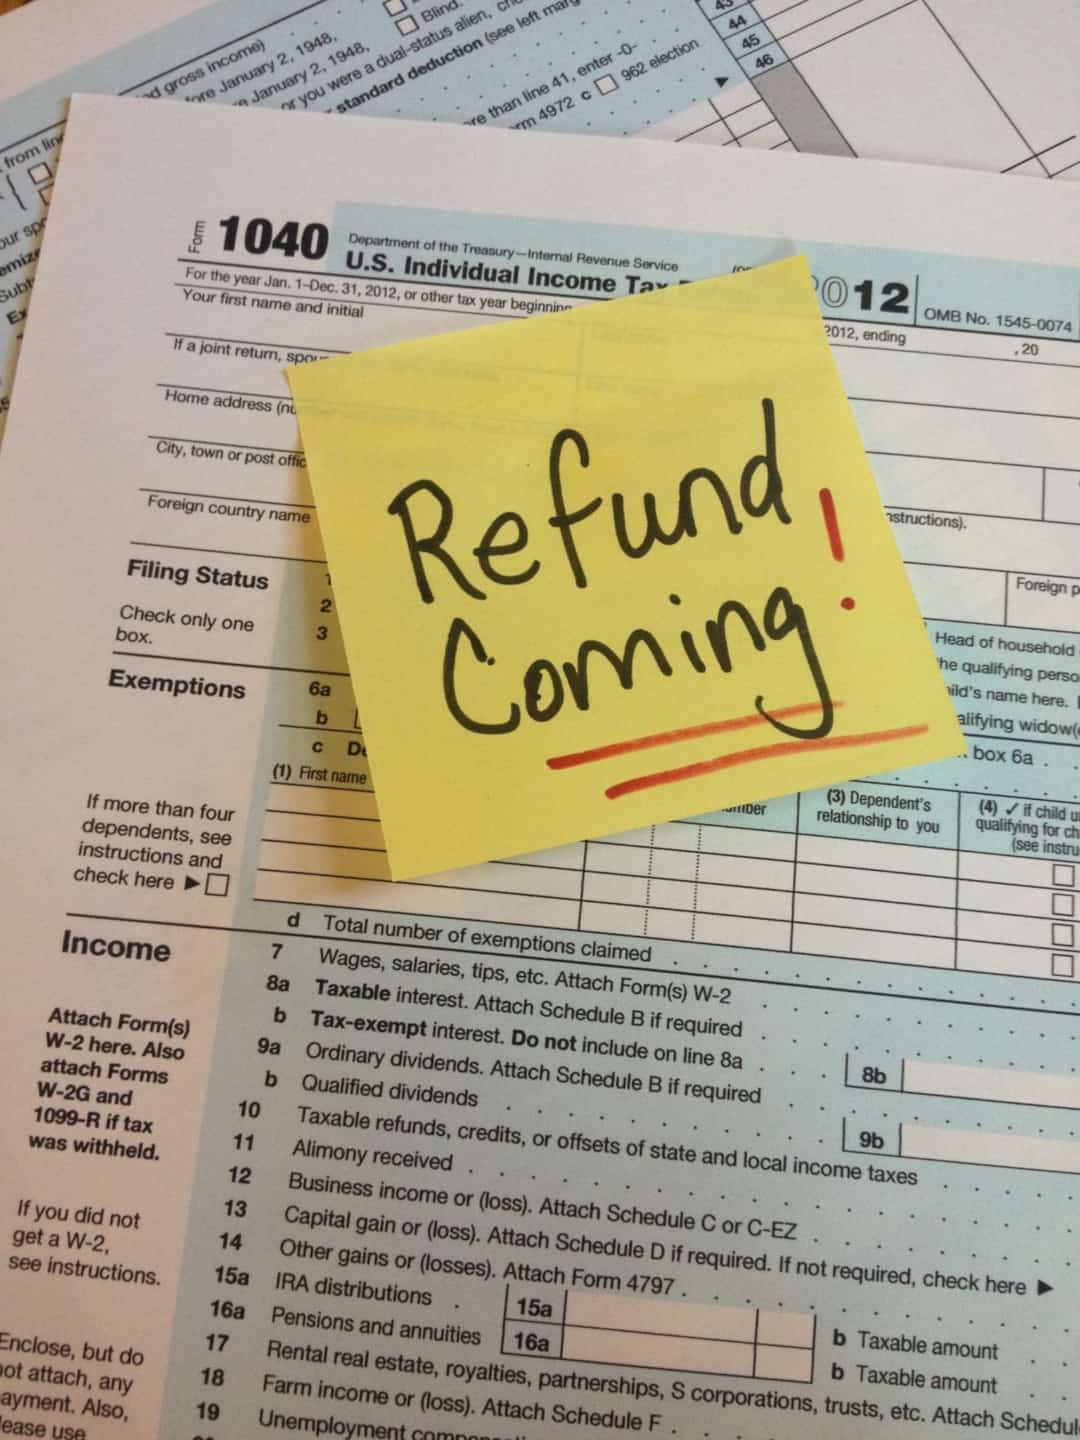 How Much Do I Owe The IRS?